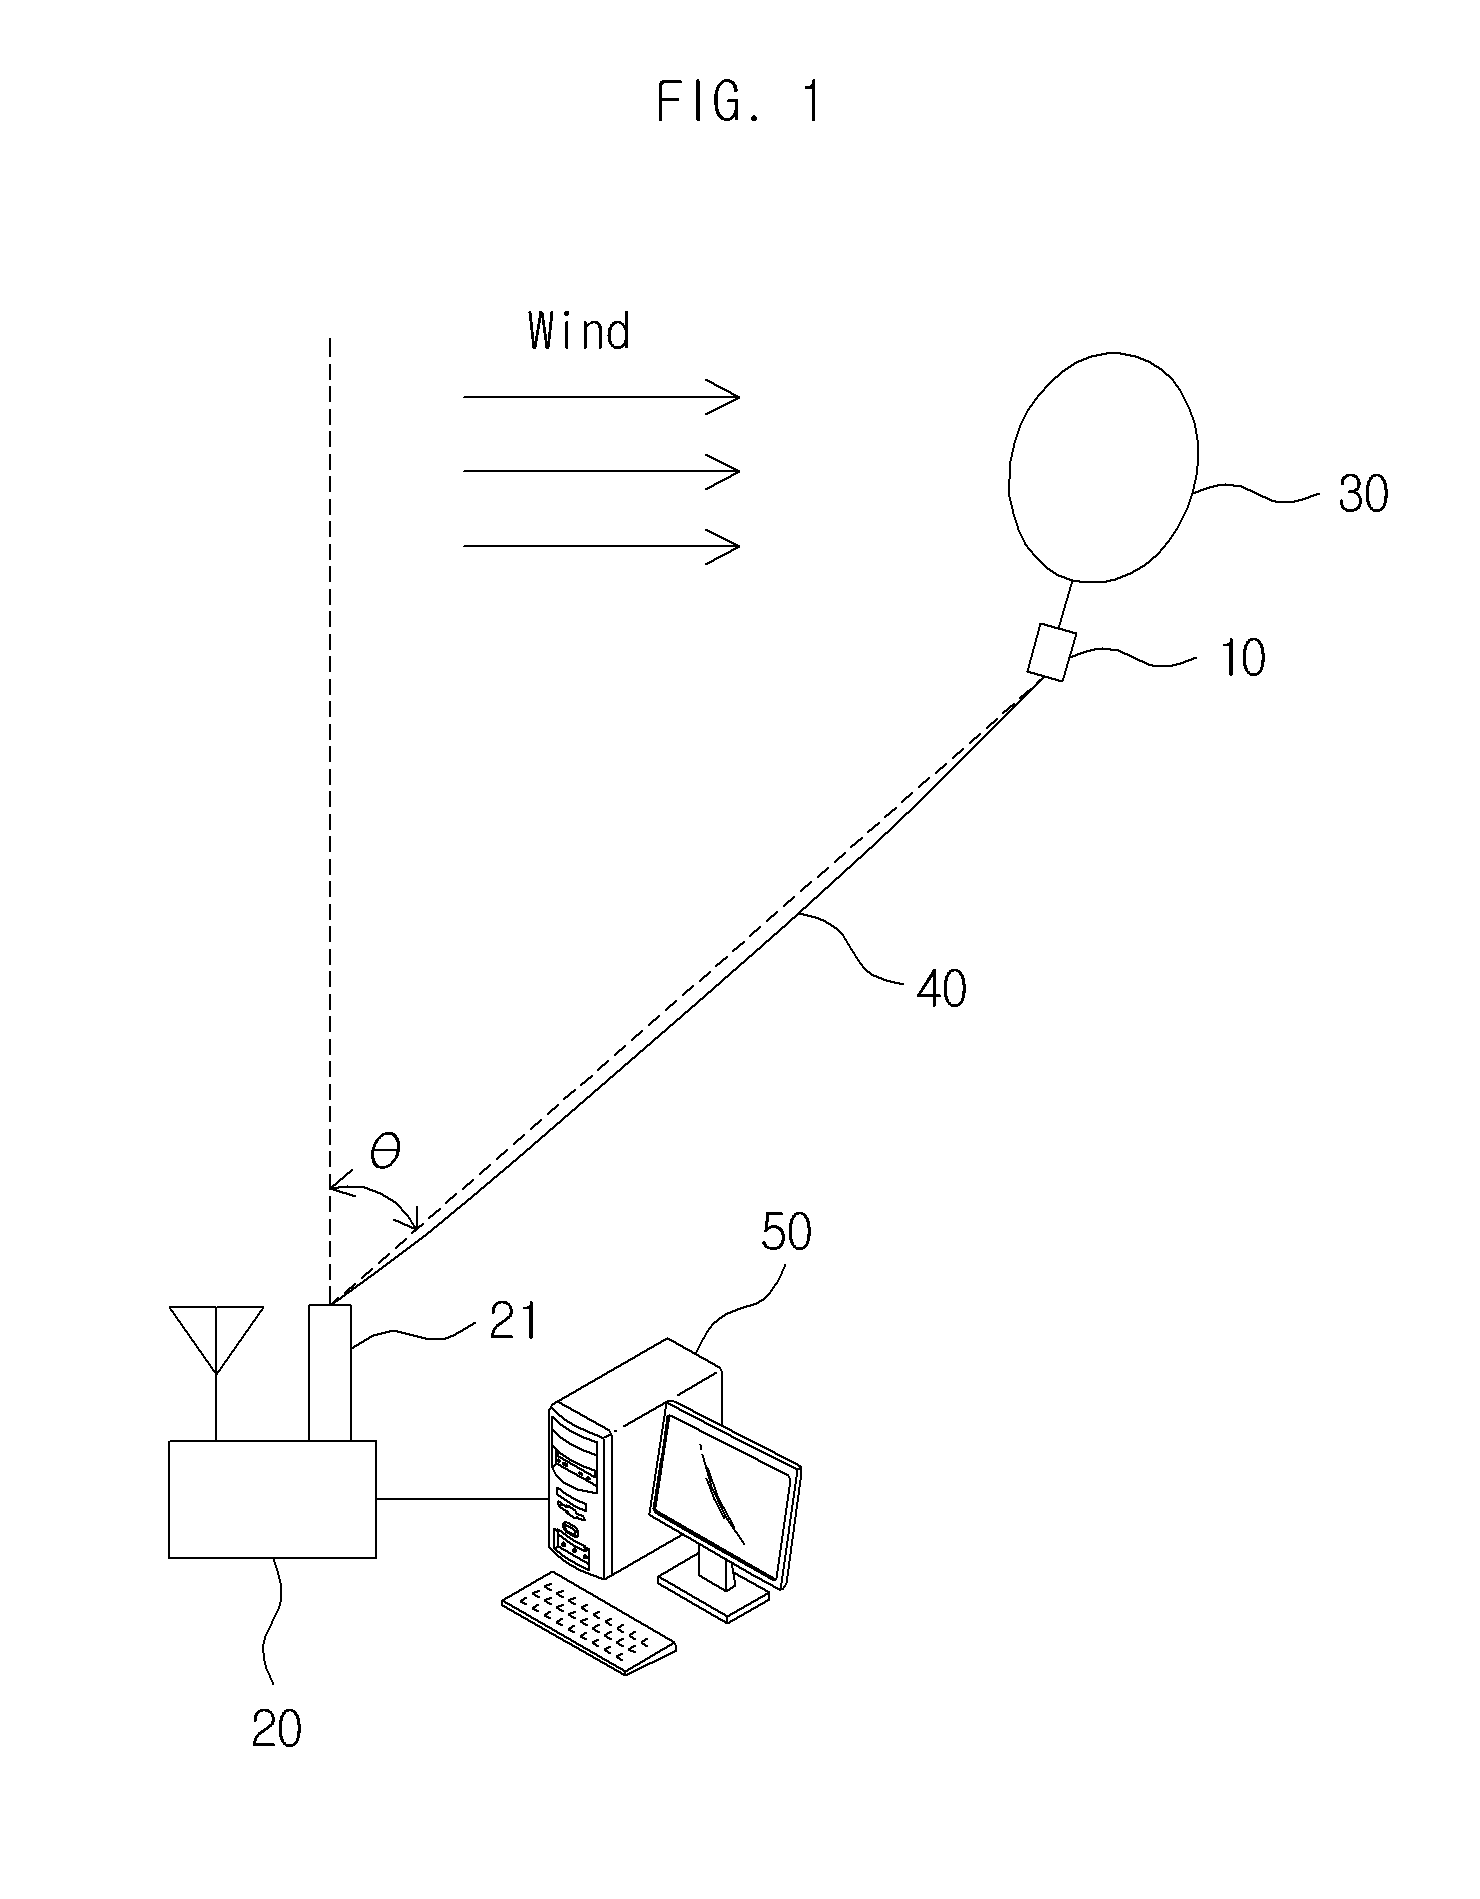 Tethersonde system and observation method thereby